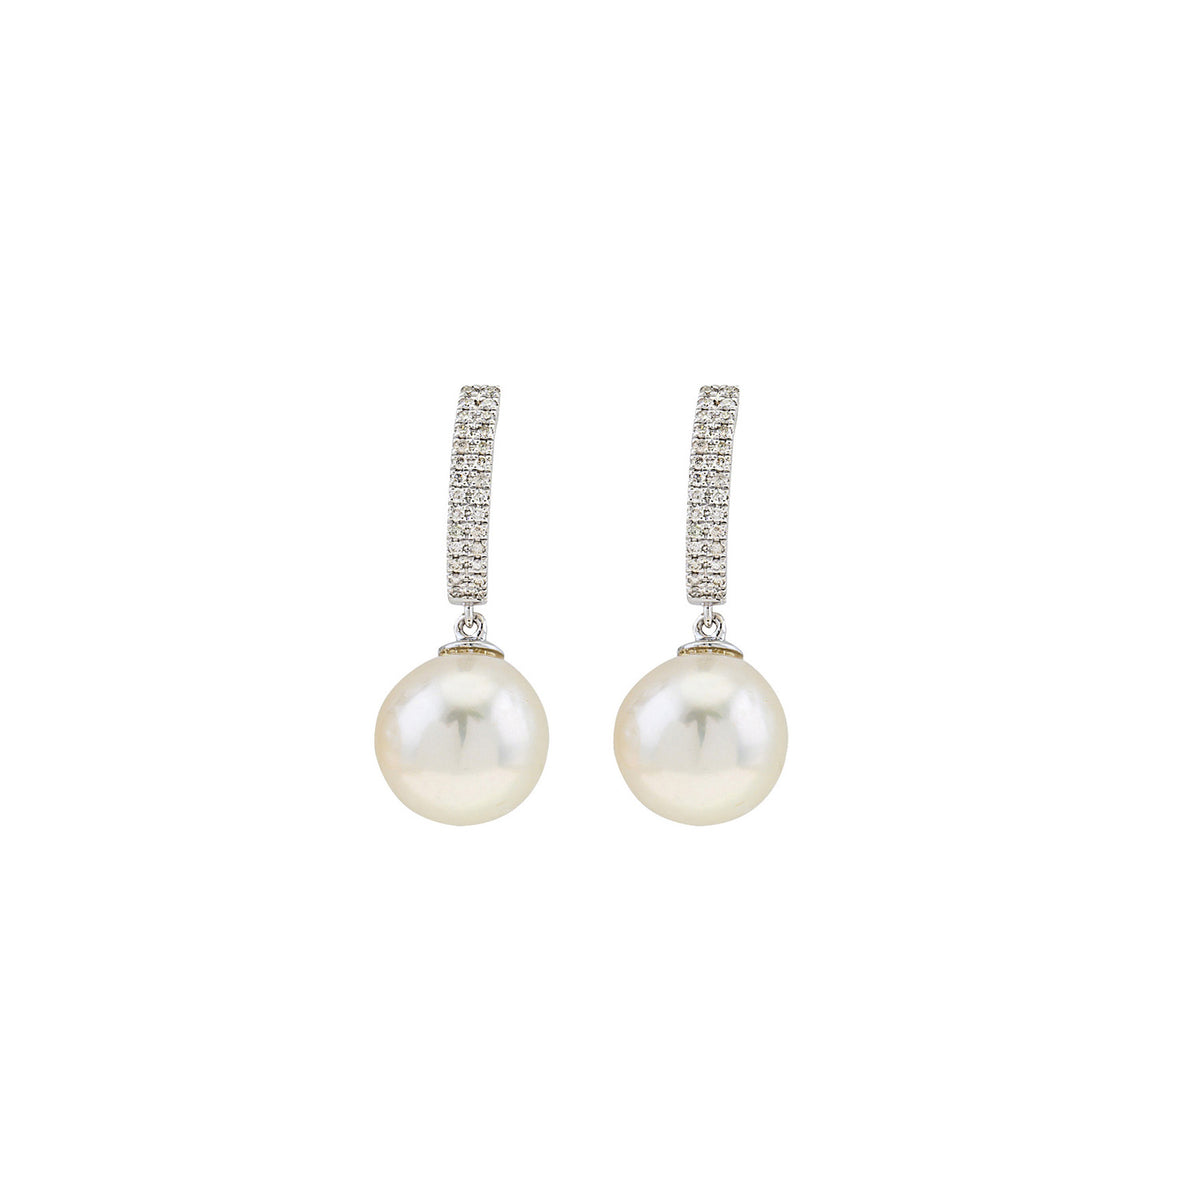 Pearl Earring. Earrings. 18K gold earring. Fresh water pearl. White Gold, yellow gold, rose gold. Perfect Gift. Earring gift. Hanging Pearl. Chain Erring. Fine jewelry. Anatol. Σκουλαρίκι χρυσό. Σκουλαρίκι  με μαργαριτάρι. Σκουλαρίκι αλυσίδα. Σκουλαρίκι με πέρλα. Athens. Button Pearl Earring.